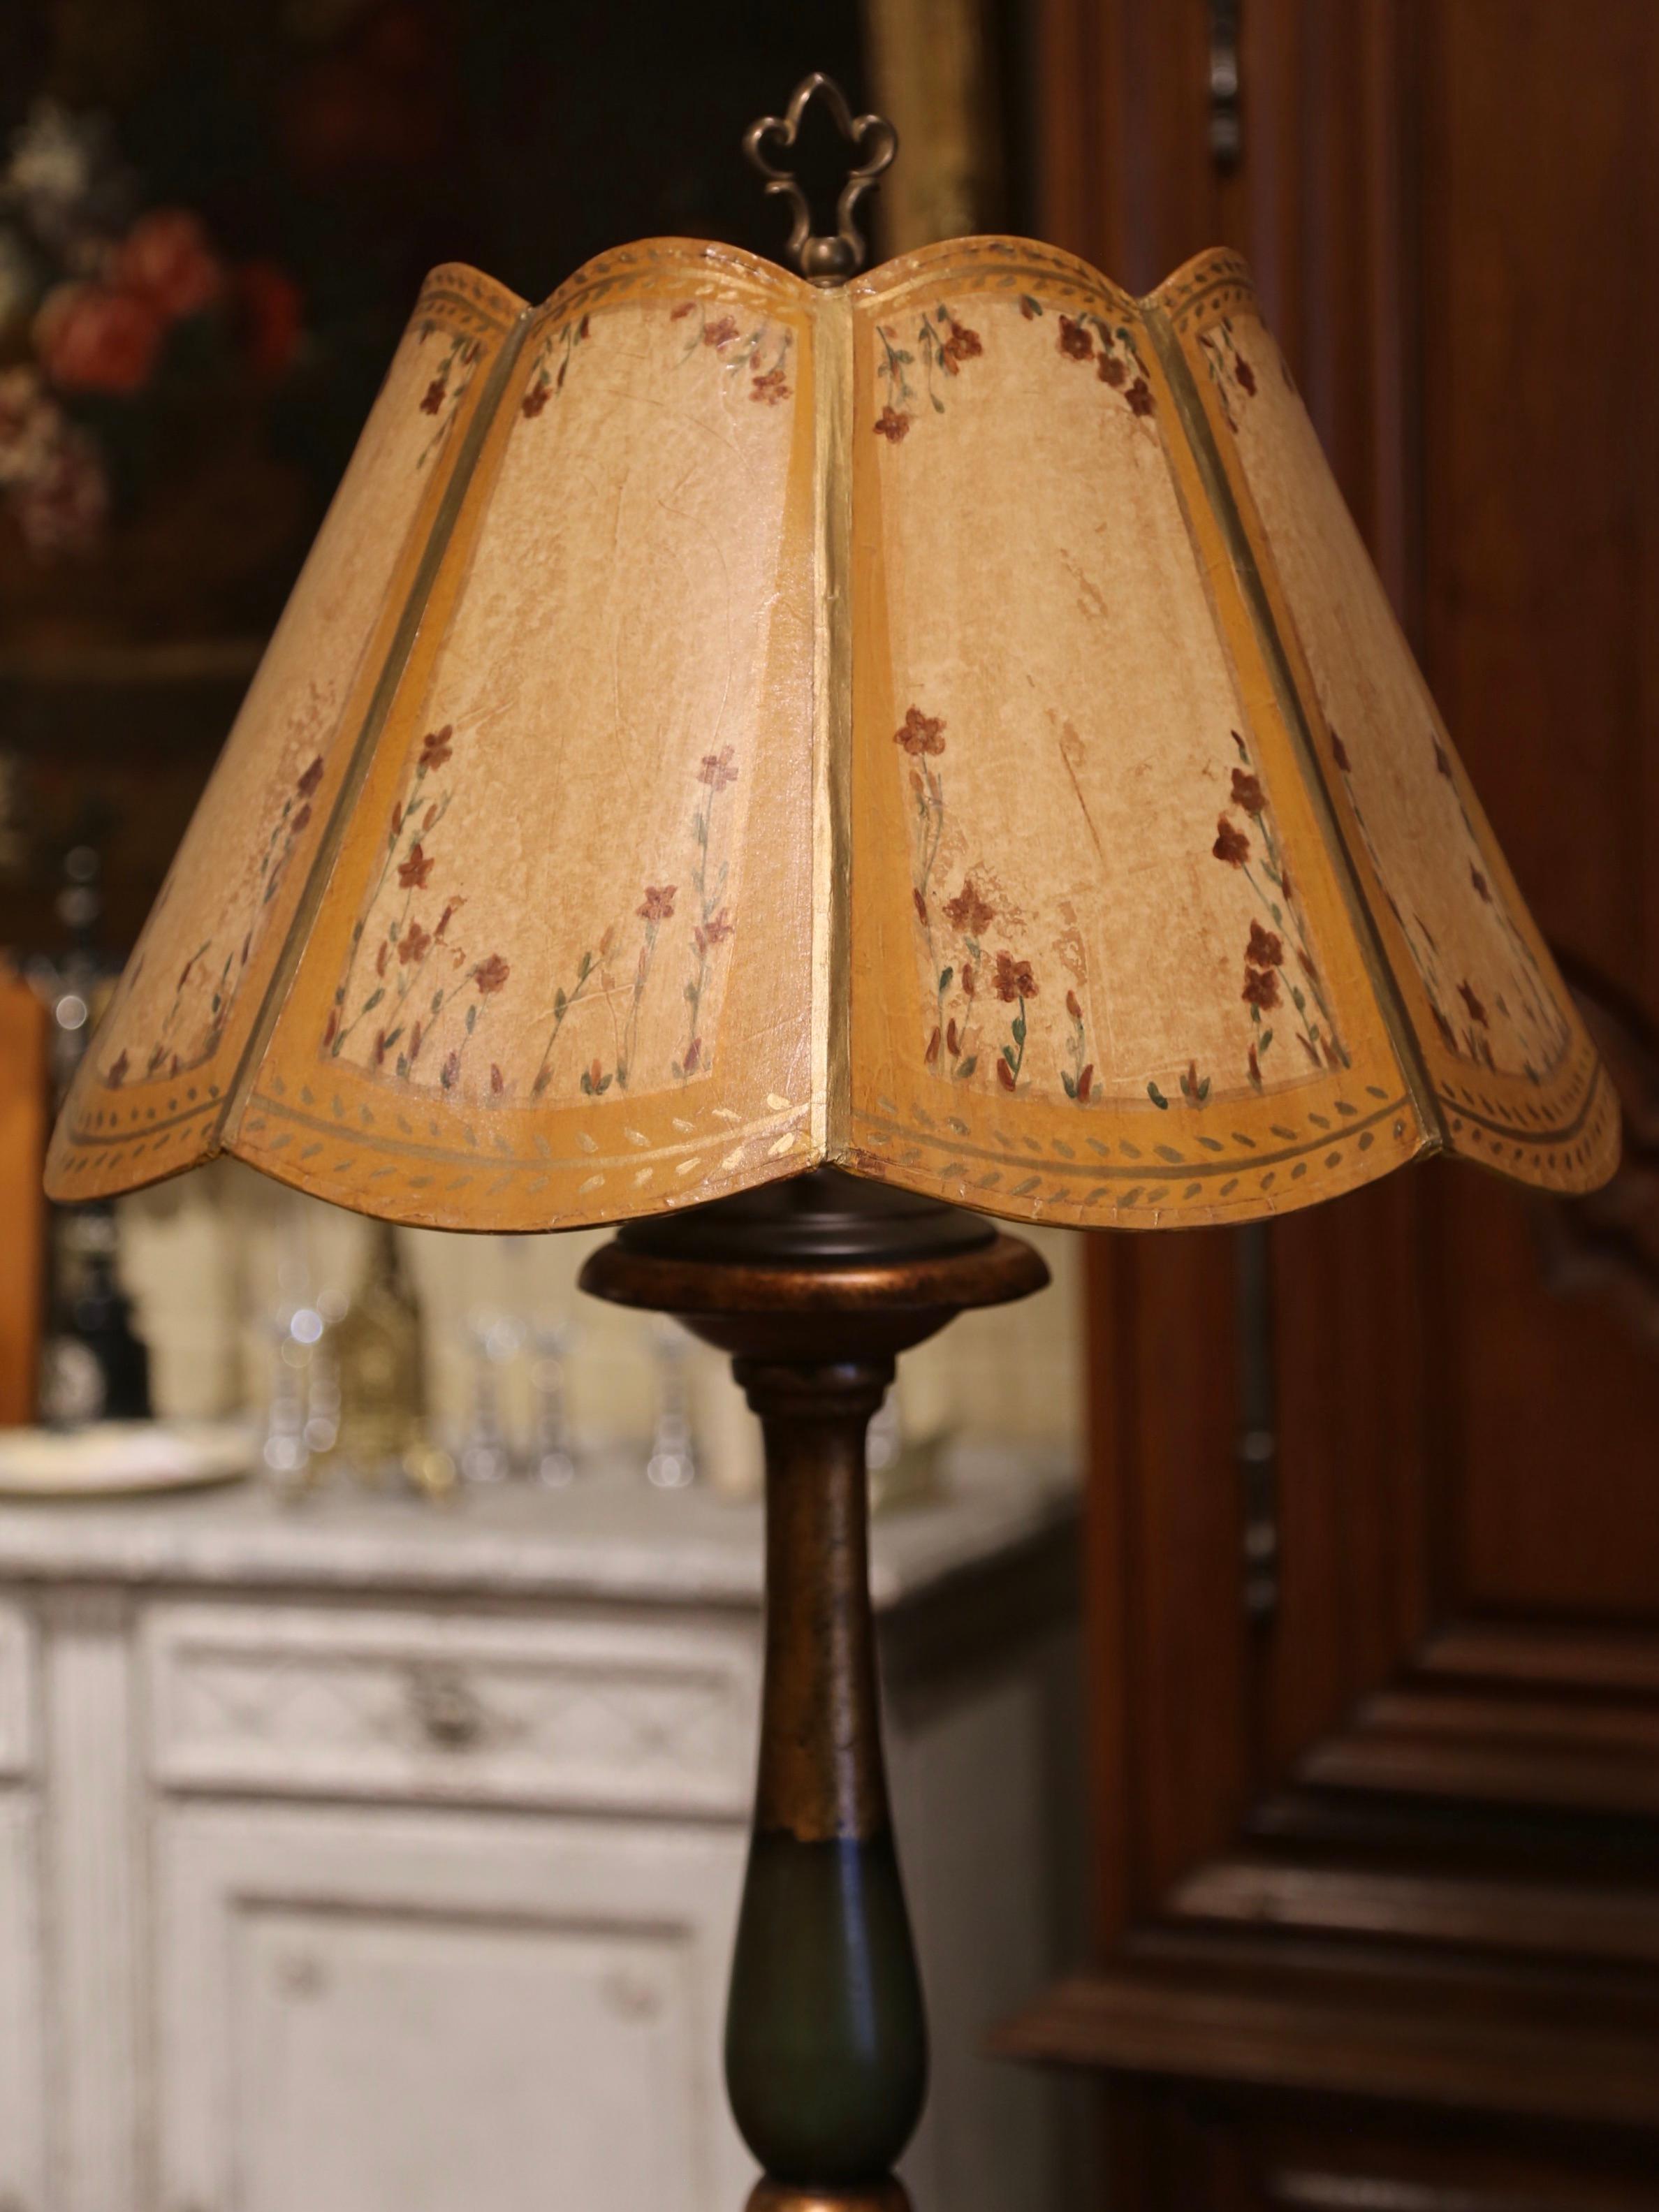 This elegant antique floor lamp was crafted in France, circa 1920. The lamp stands on a round stem over a long carved and turned stem. The fixture is dressed with a single center light and embellished with a custom shade decorated with hand painted